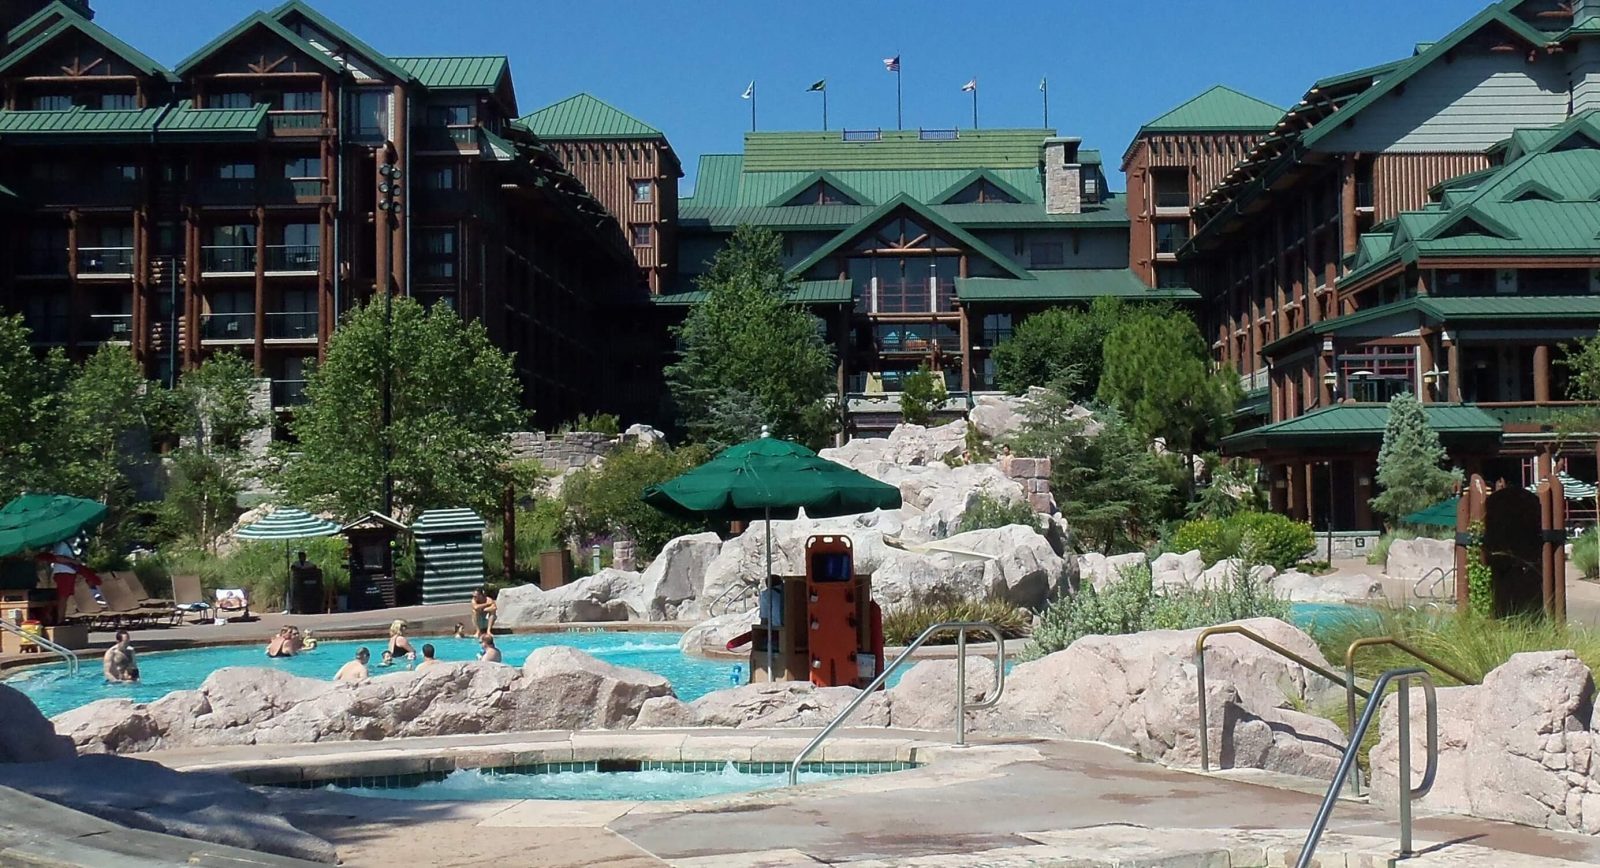 Pool and exterior of disney's wilderness lodge